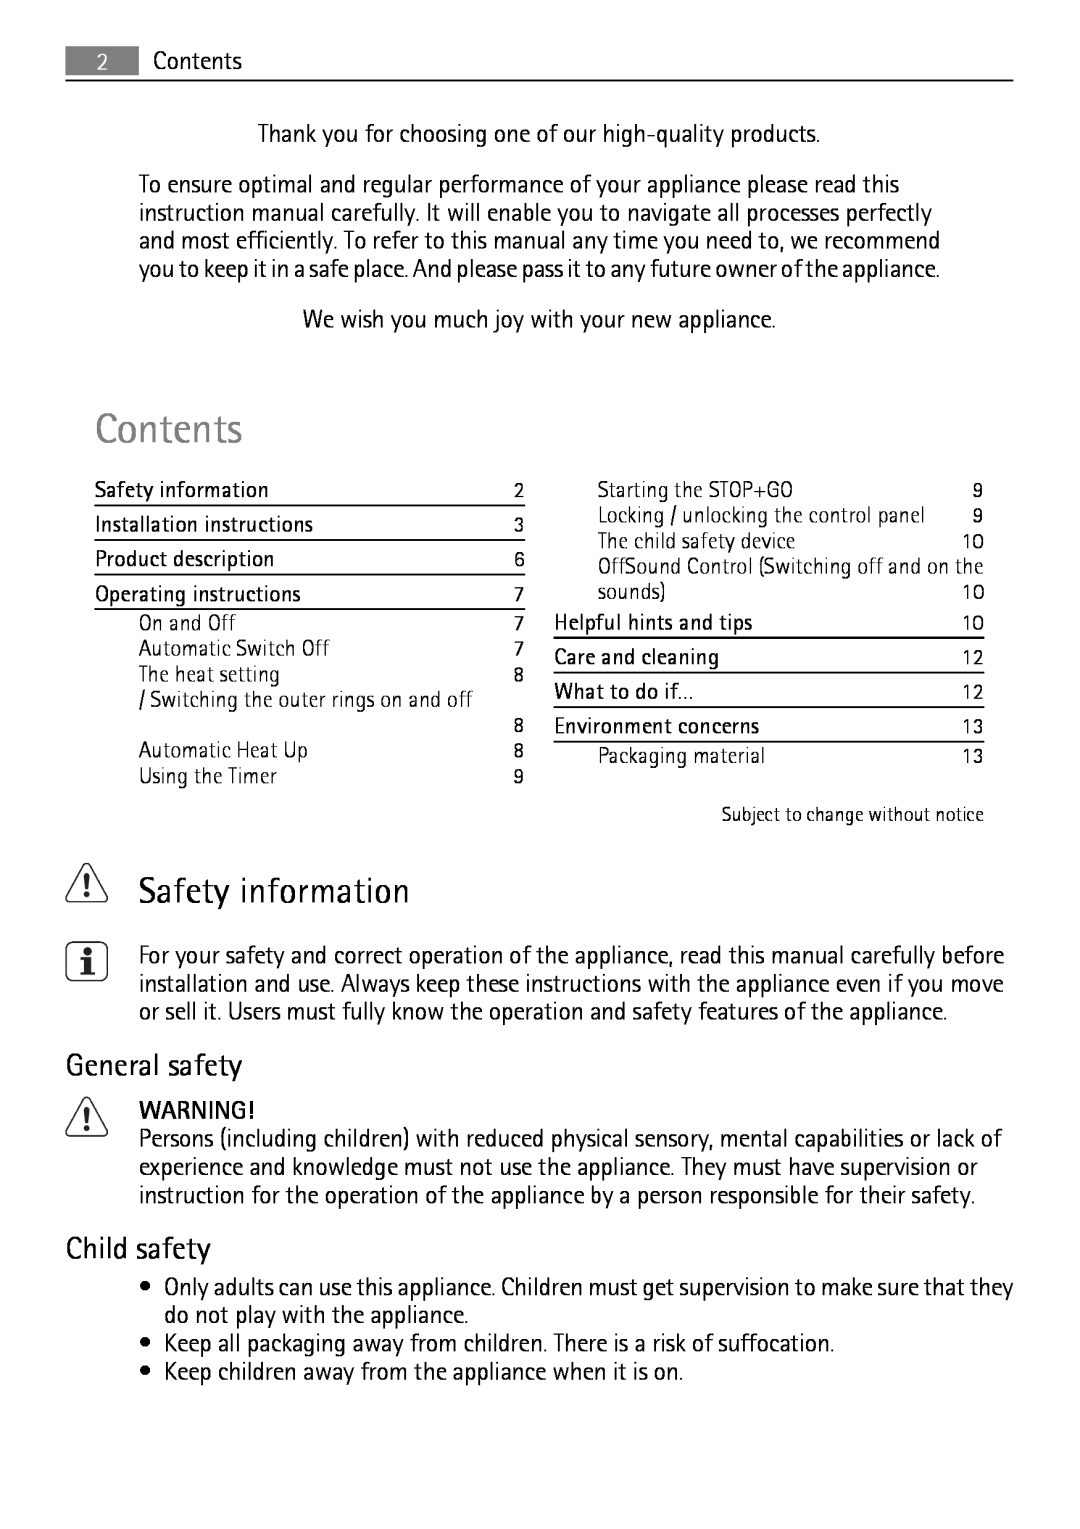 AEG HK854080XB user manual Safety information, General safety, Child safety, Contents 